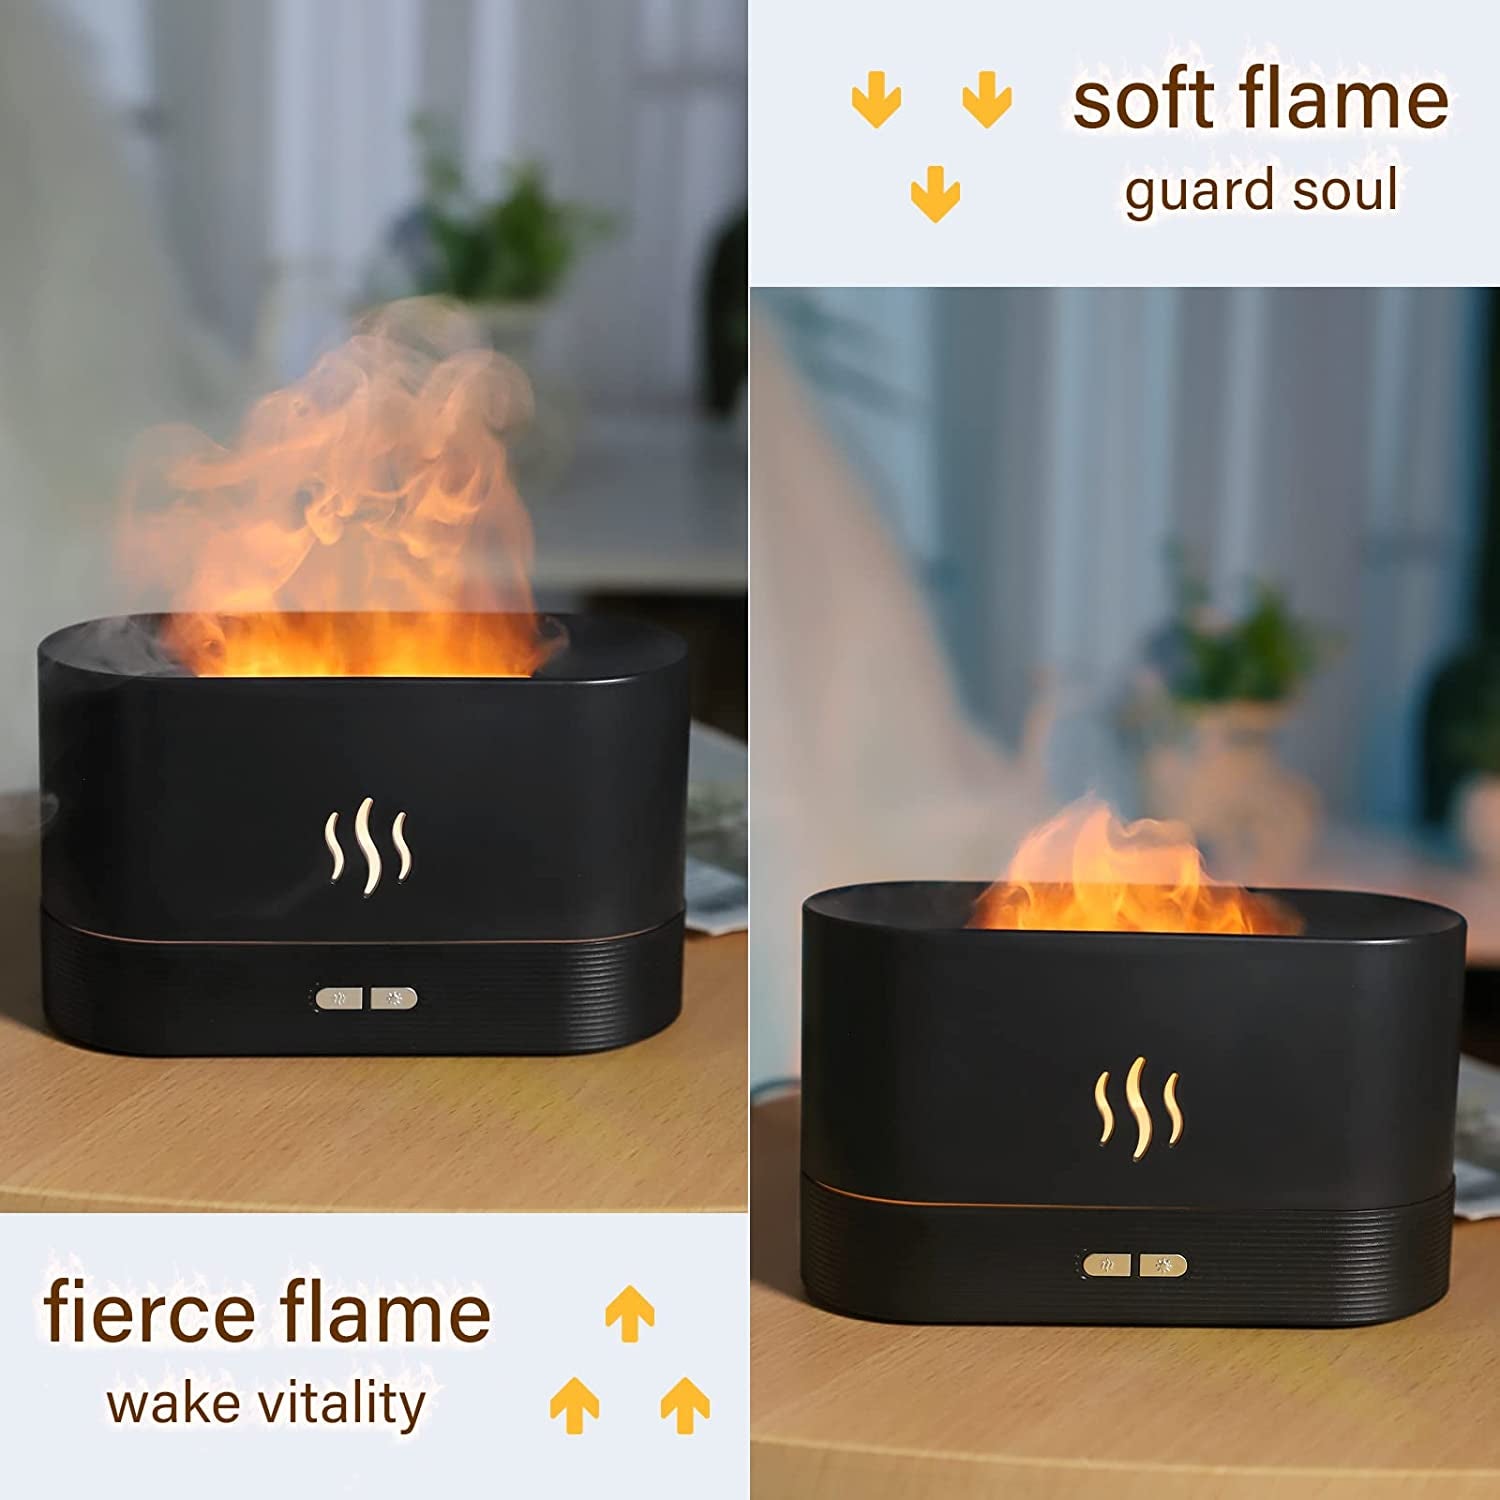 Flame Air Diffuser,Humidifier,Portable-Noiseless Aroma Diffuser for Home,Office or Yoga Essential Oil Diffuser with No-Water Auto-Off Protection(Black)